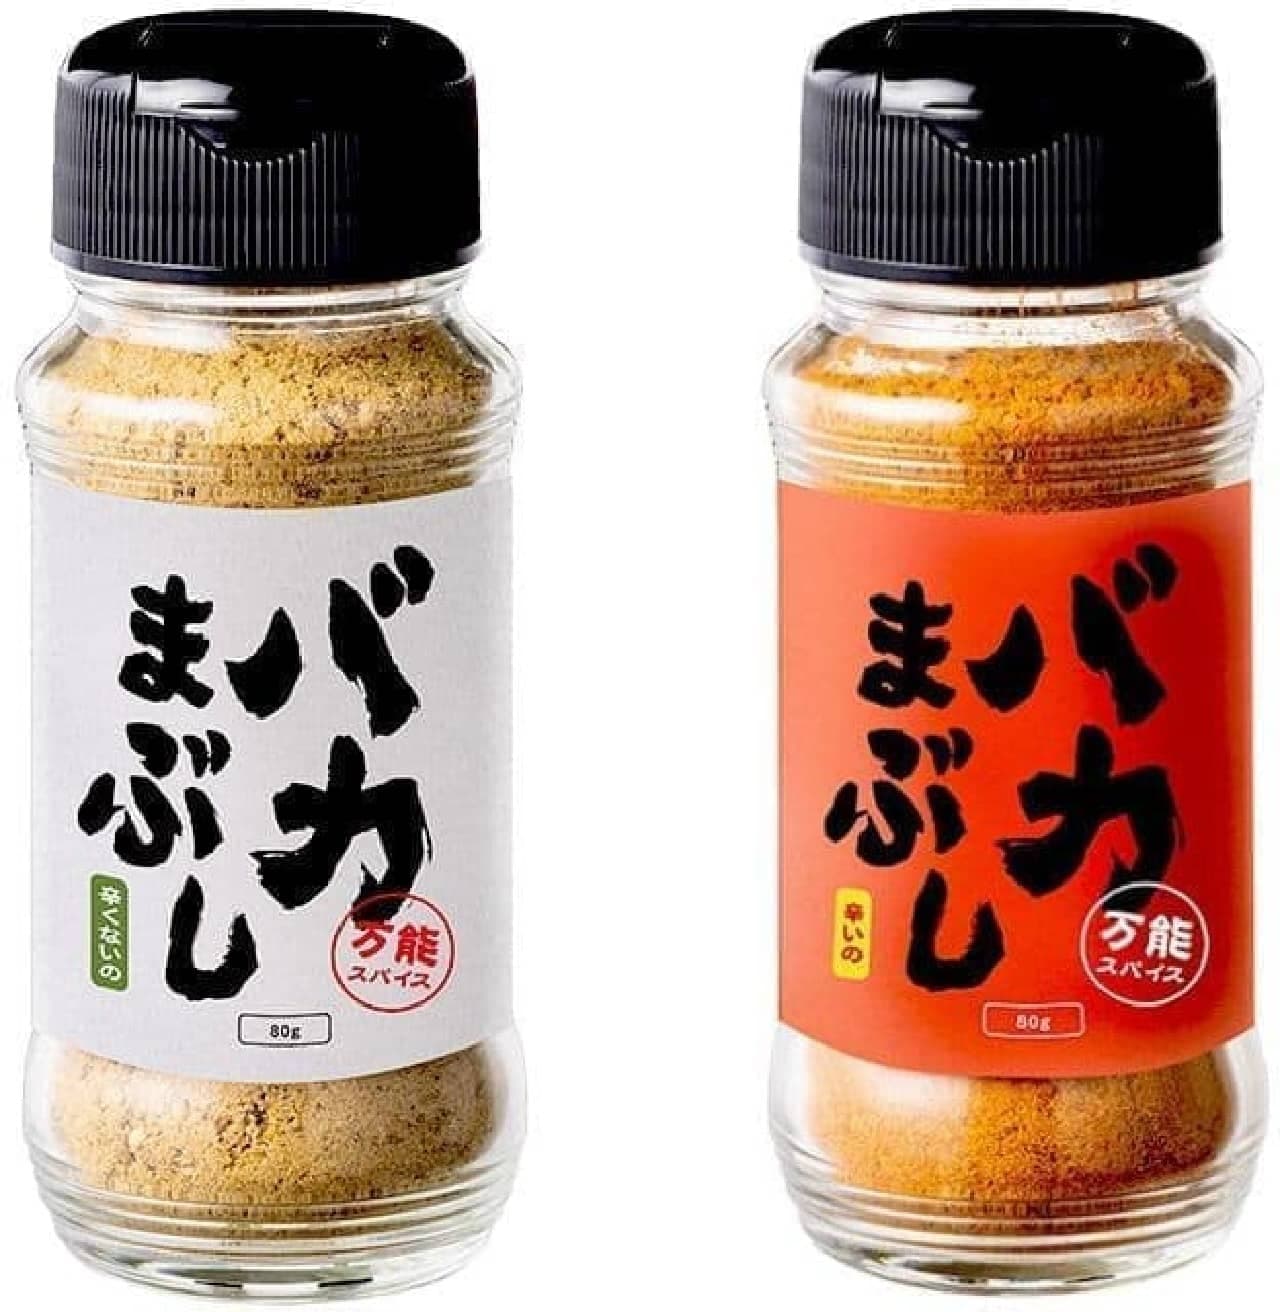 BAKAMABUSHI, an all-purpose spice that goes well with meat, fish, and vegetables